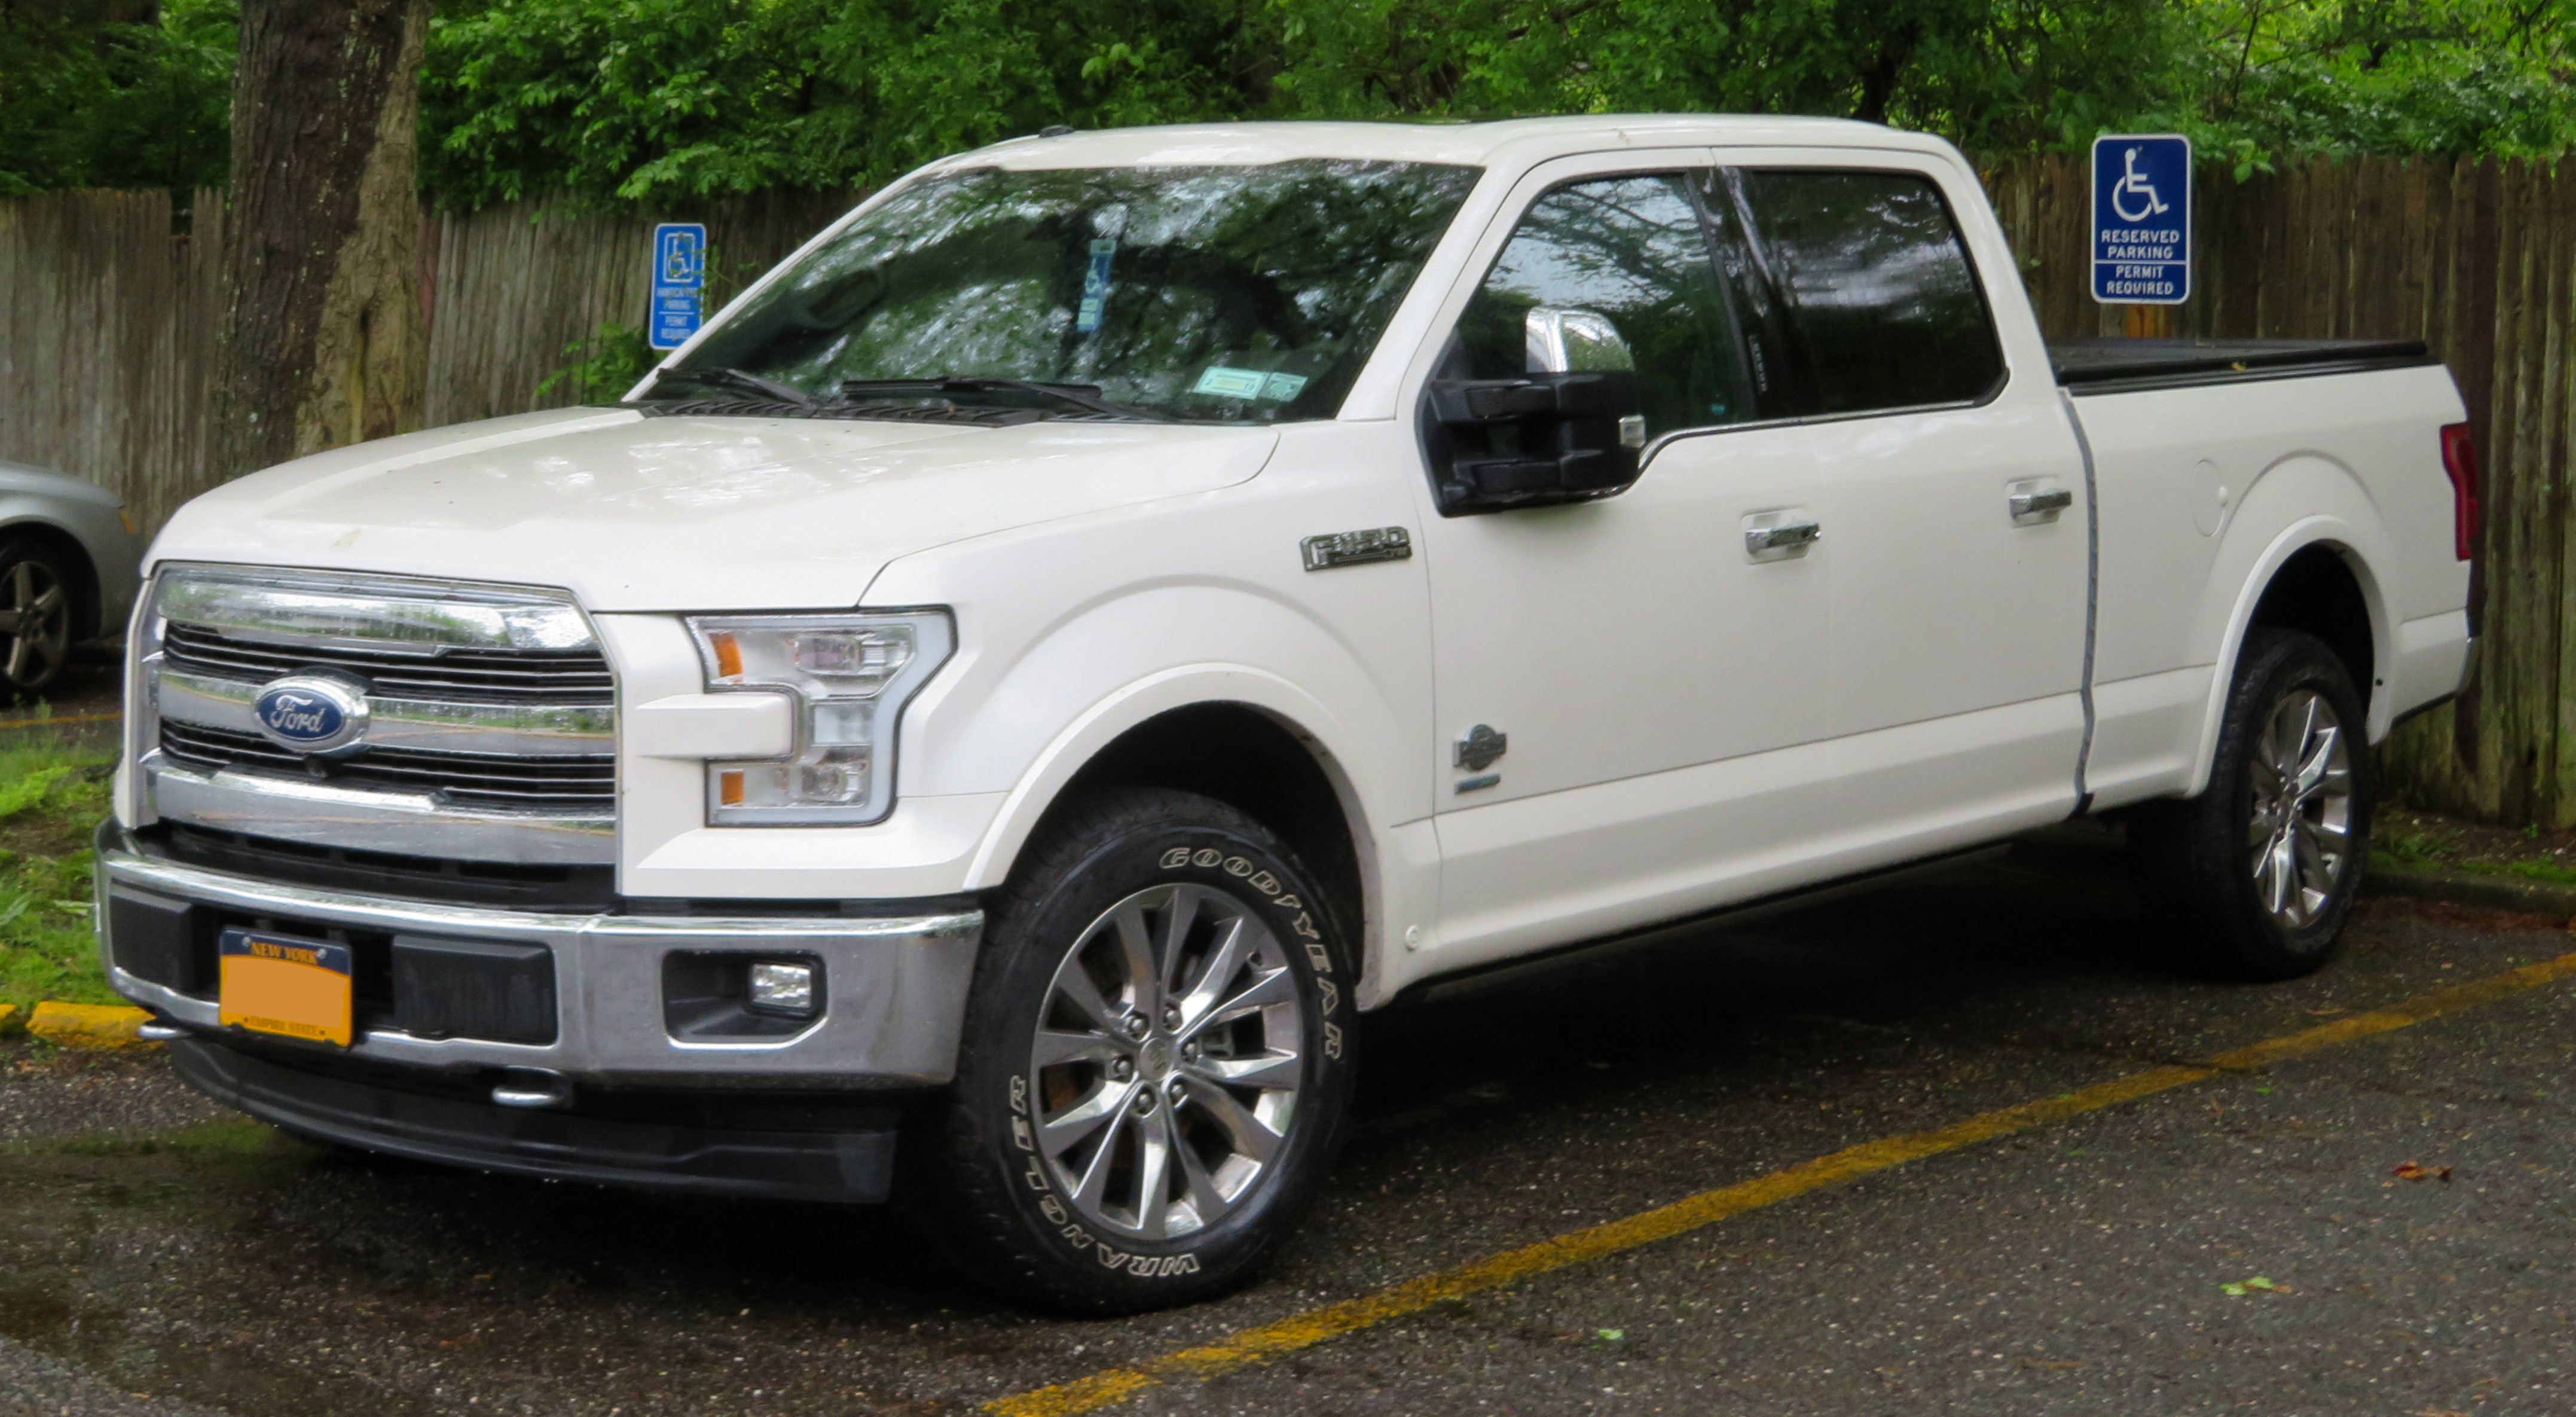 Chip Shortage Leads Ford To Idle F-150 Plant Through Sunday